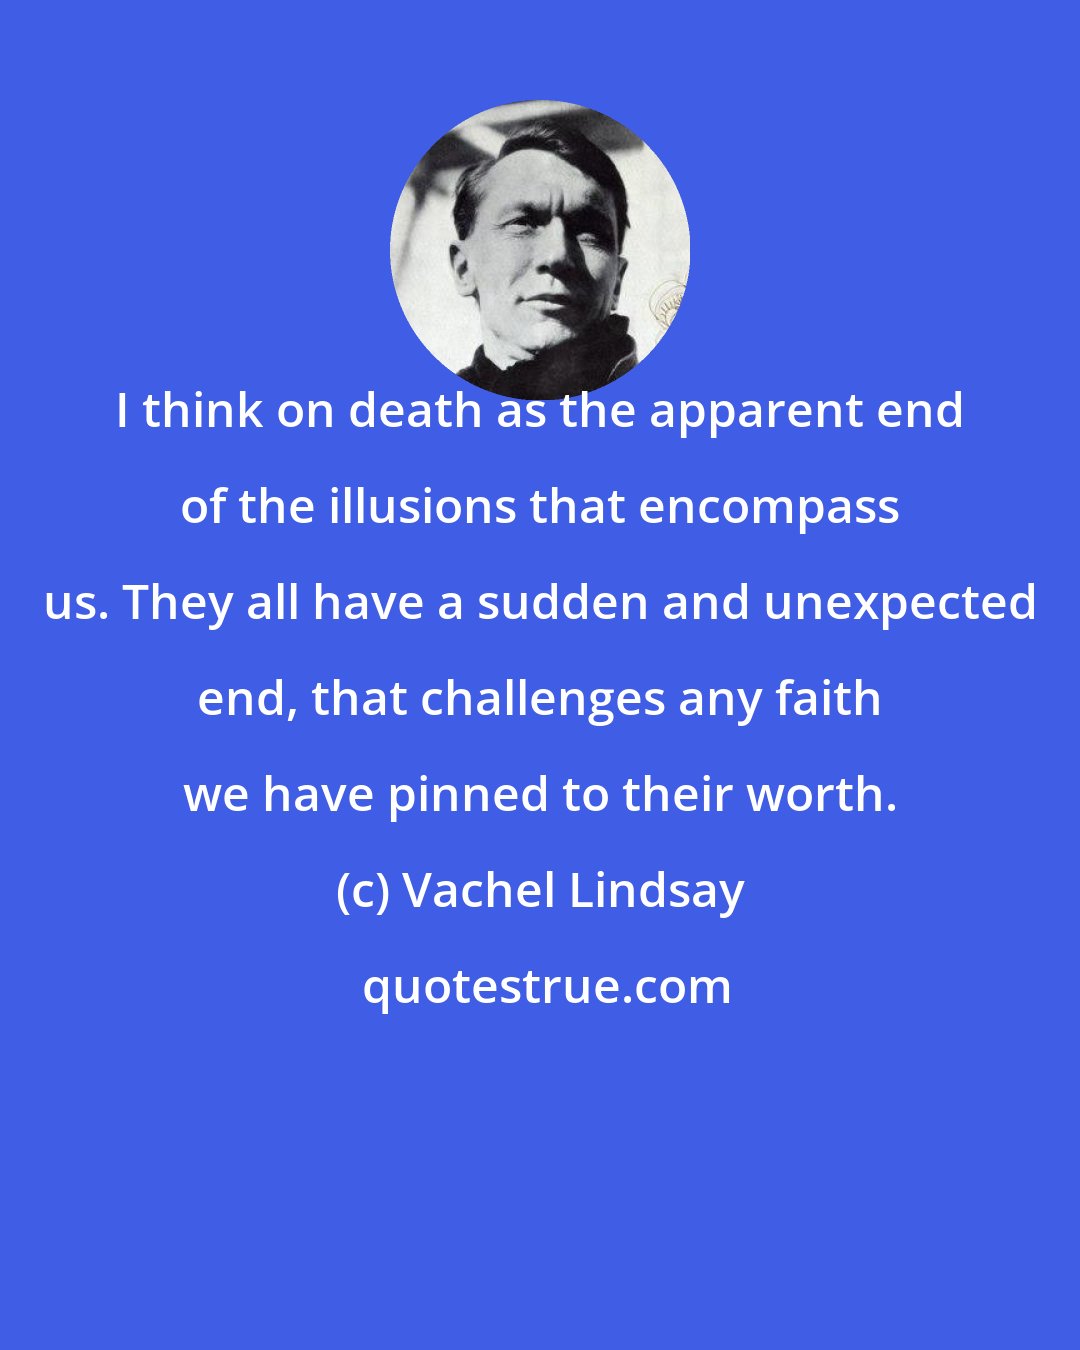 Vachel Lindsay: I think on death as the apparent end of the illusions that encompass us. They all have a sudden and unexpected end, that challenges any faith we have pinned to their worth.